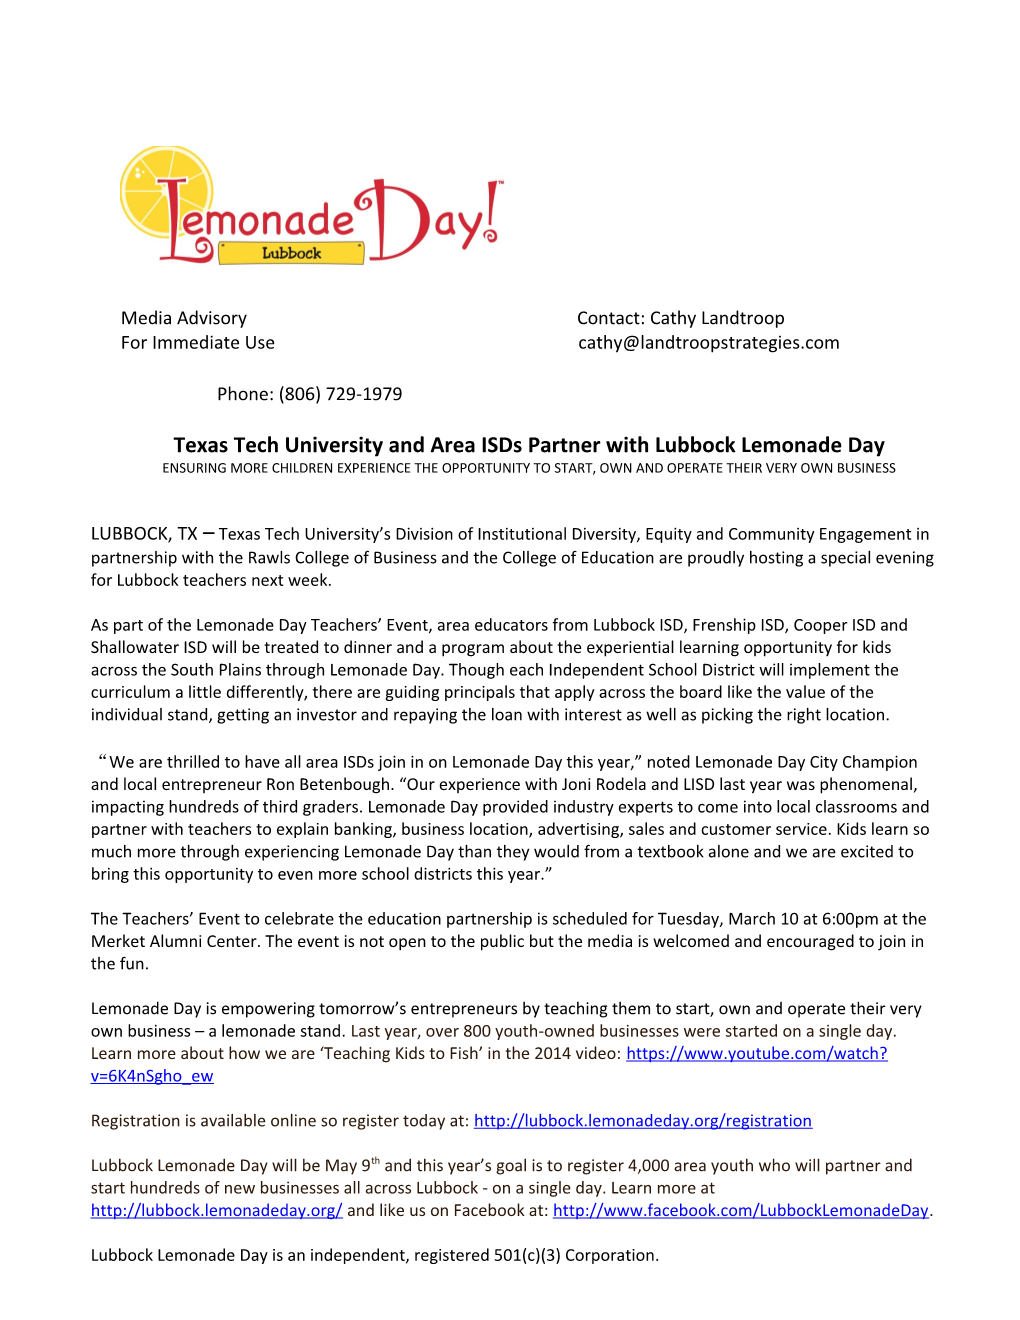 Texas Tech University and Area Isds Partner with Lubbock Lemonade Day